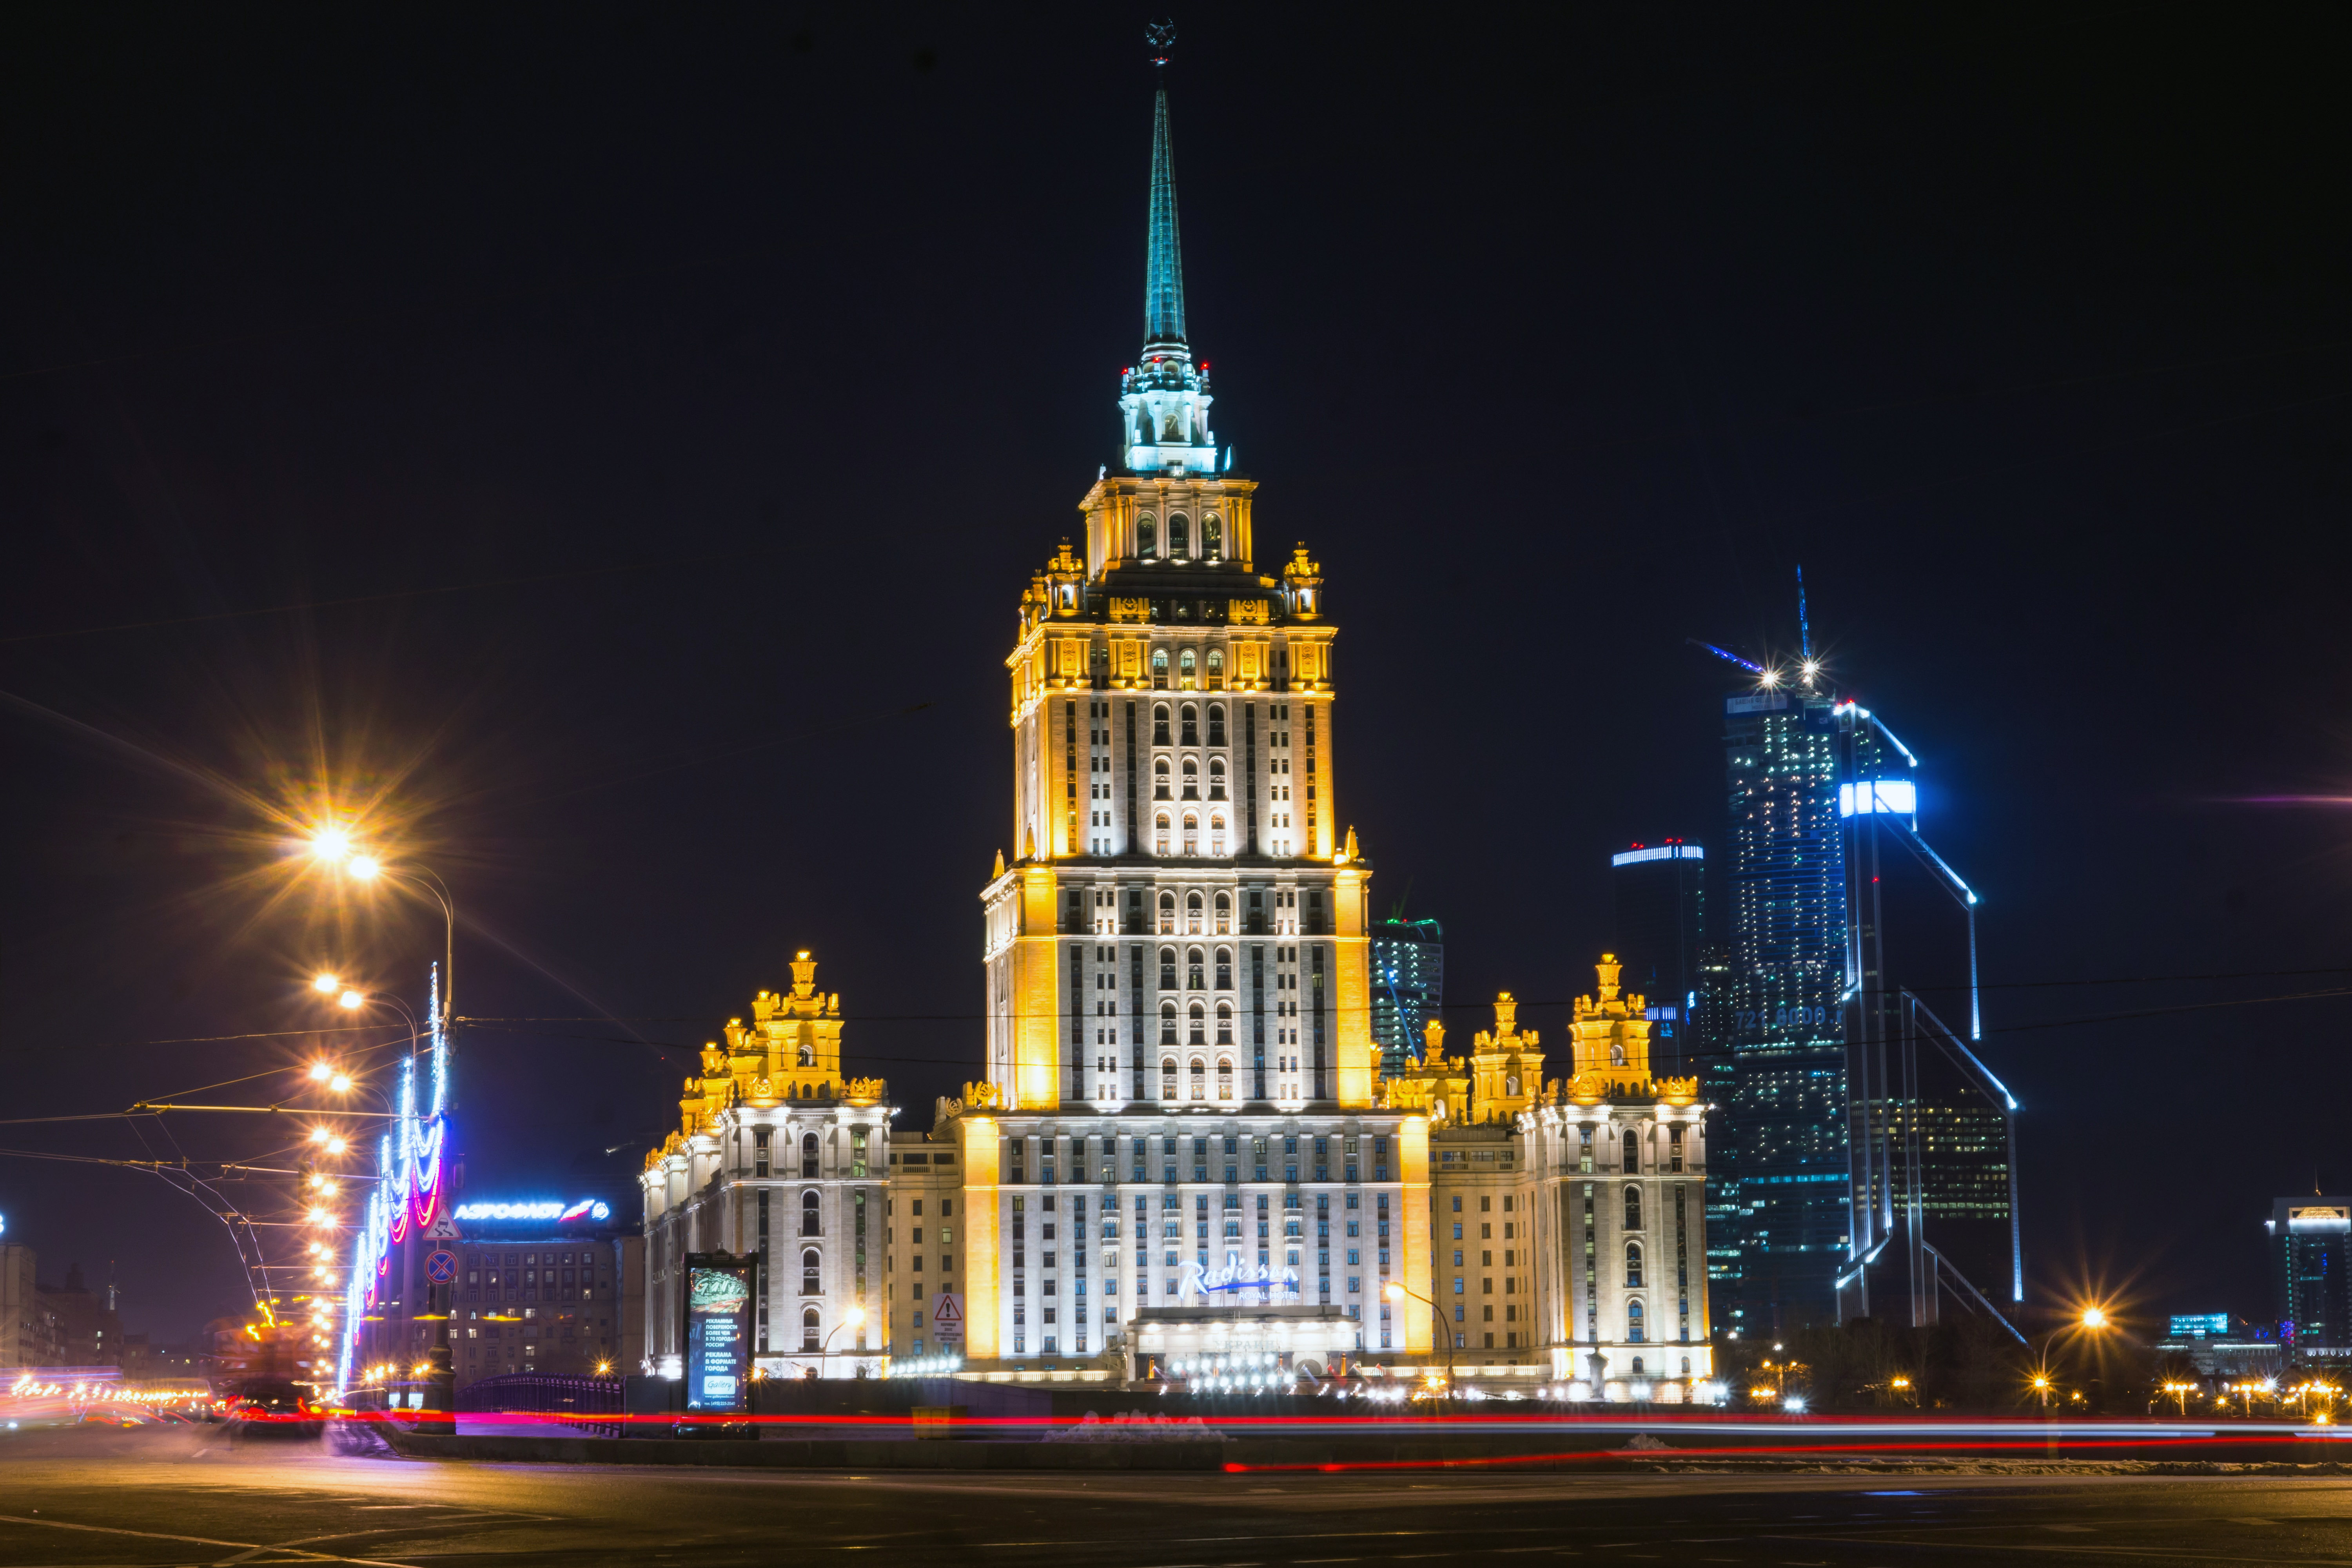 Hotel of Moscow at Night in Russia image - Free stock photo - Public ...